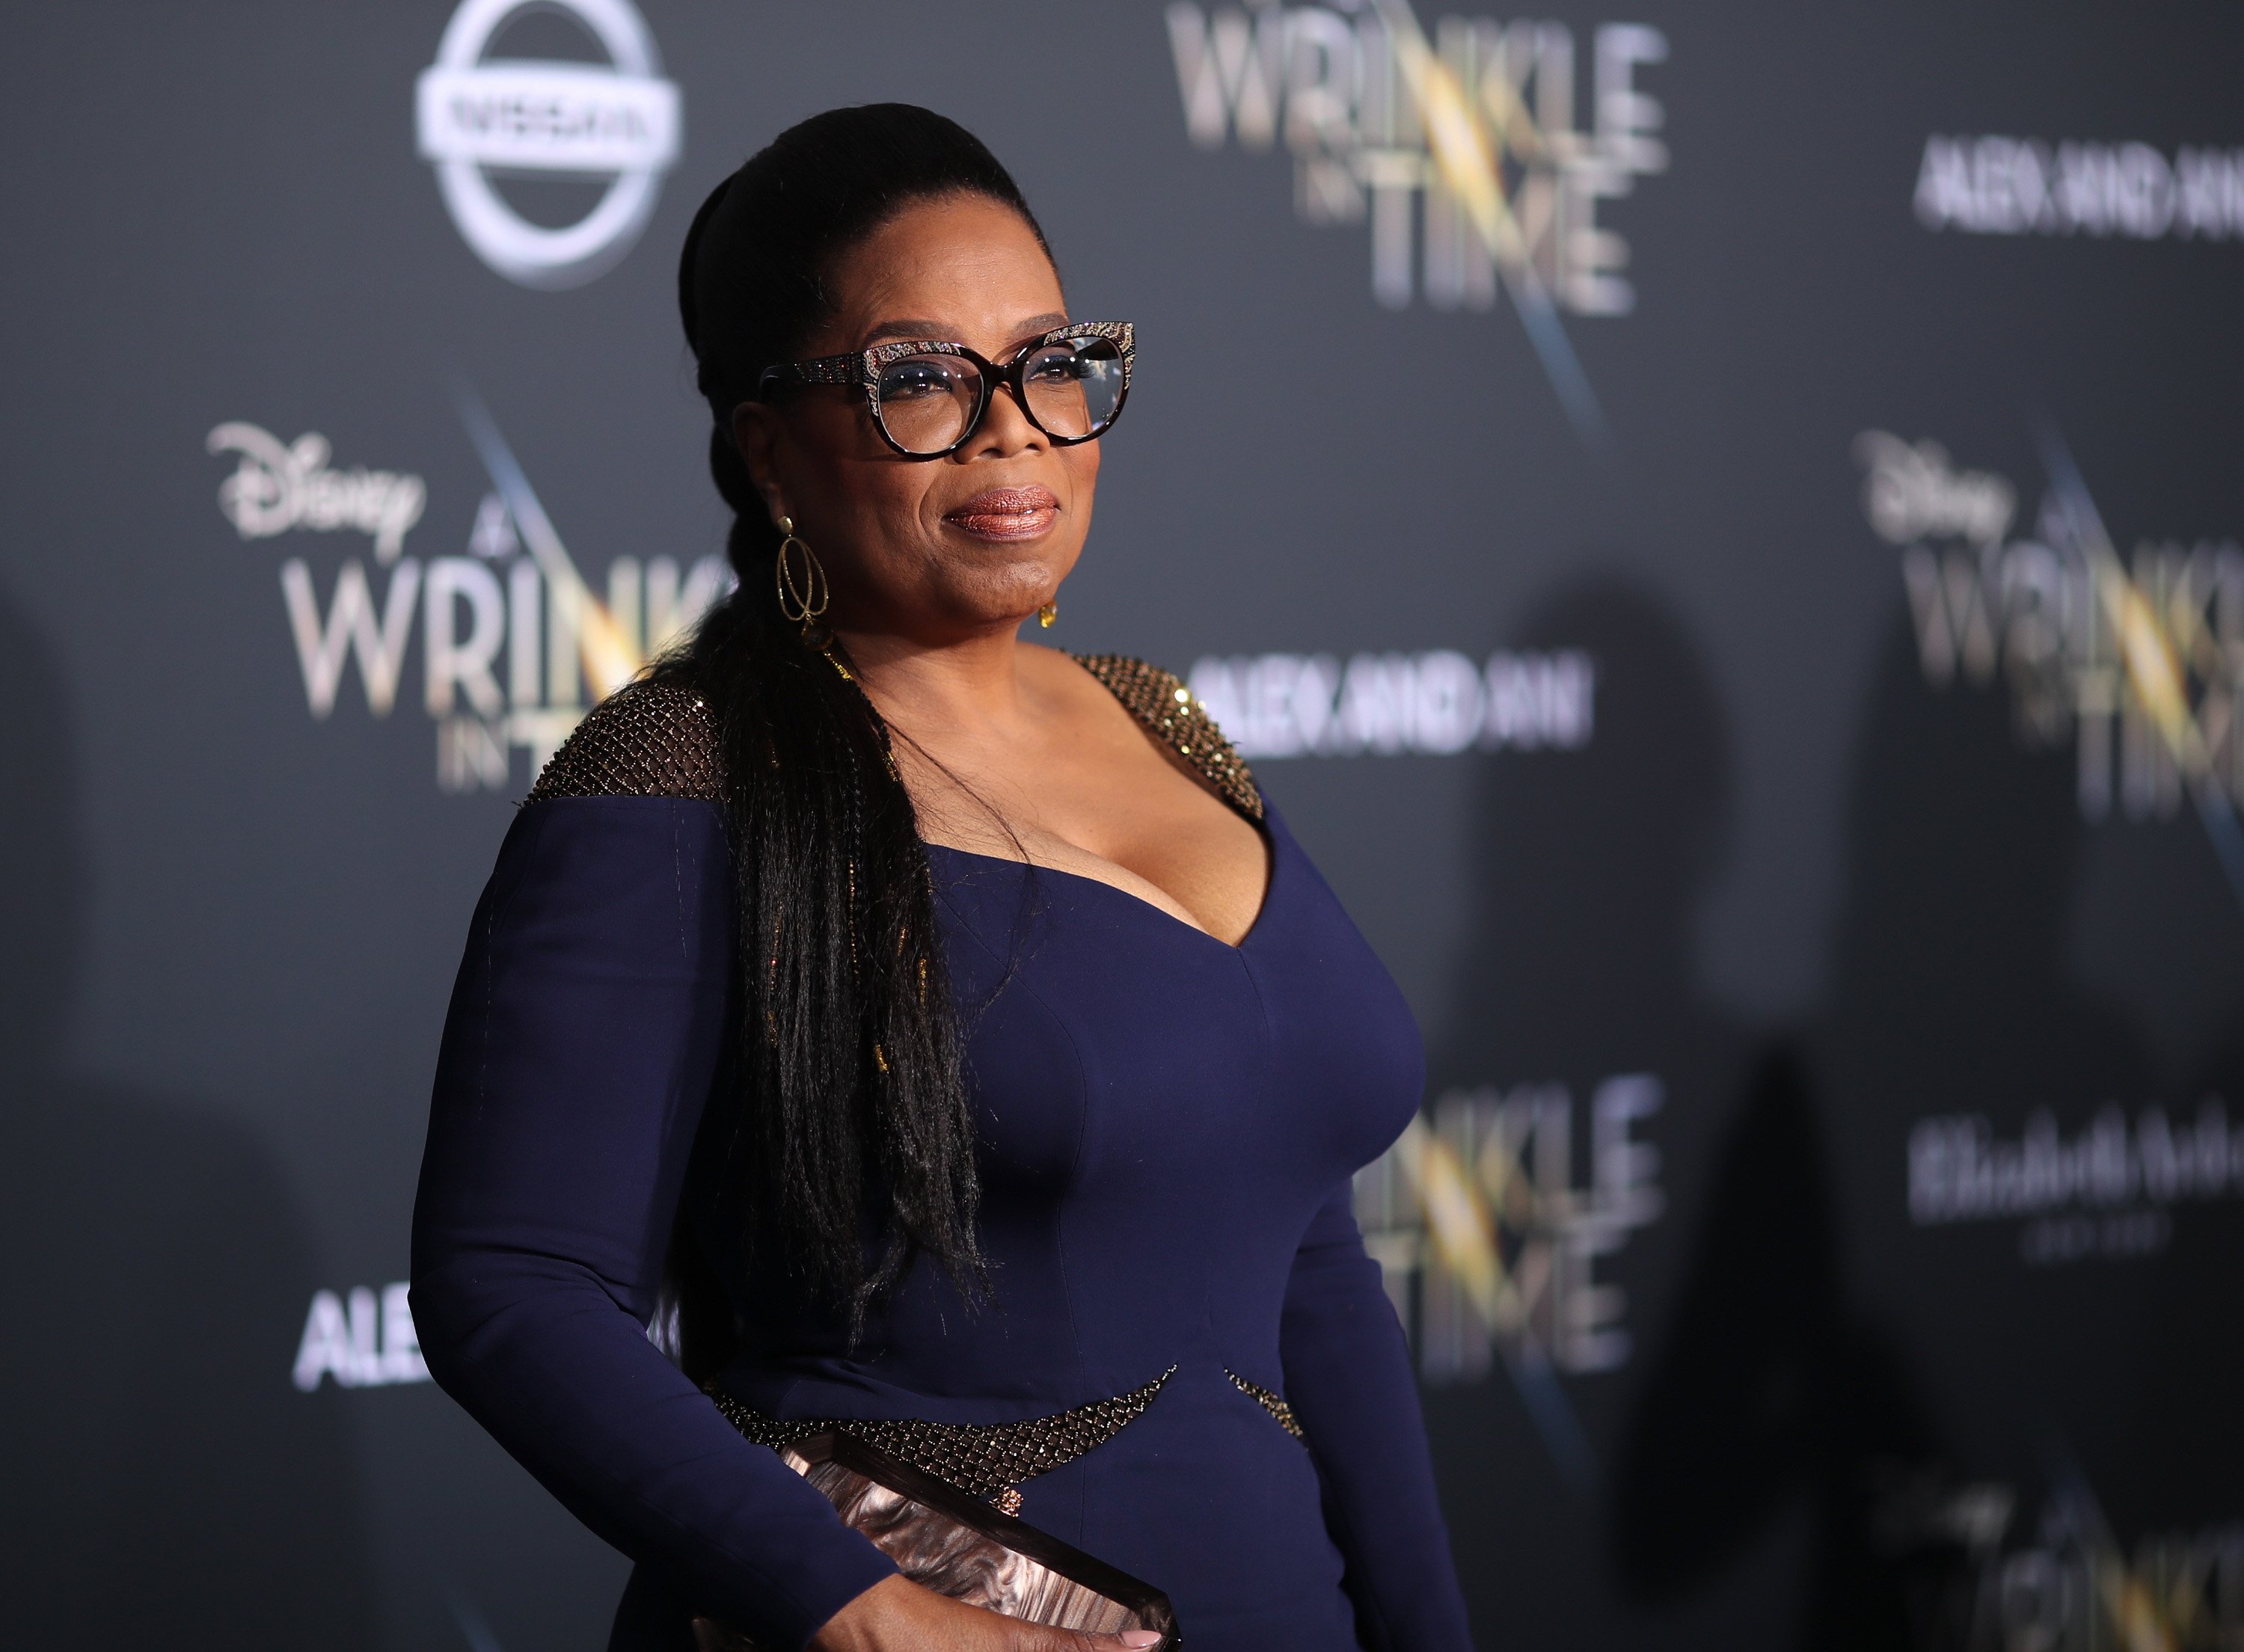  Oprah Winfrey attends the premiere of Disney's "A Wrinkle In Time" at the El Capitan Theatre on February 26, 2018. | Photo: GettyImages